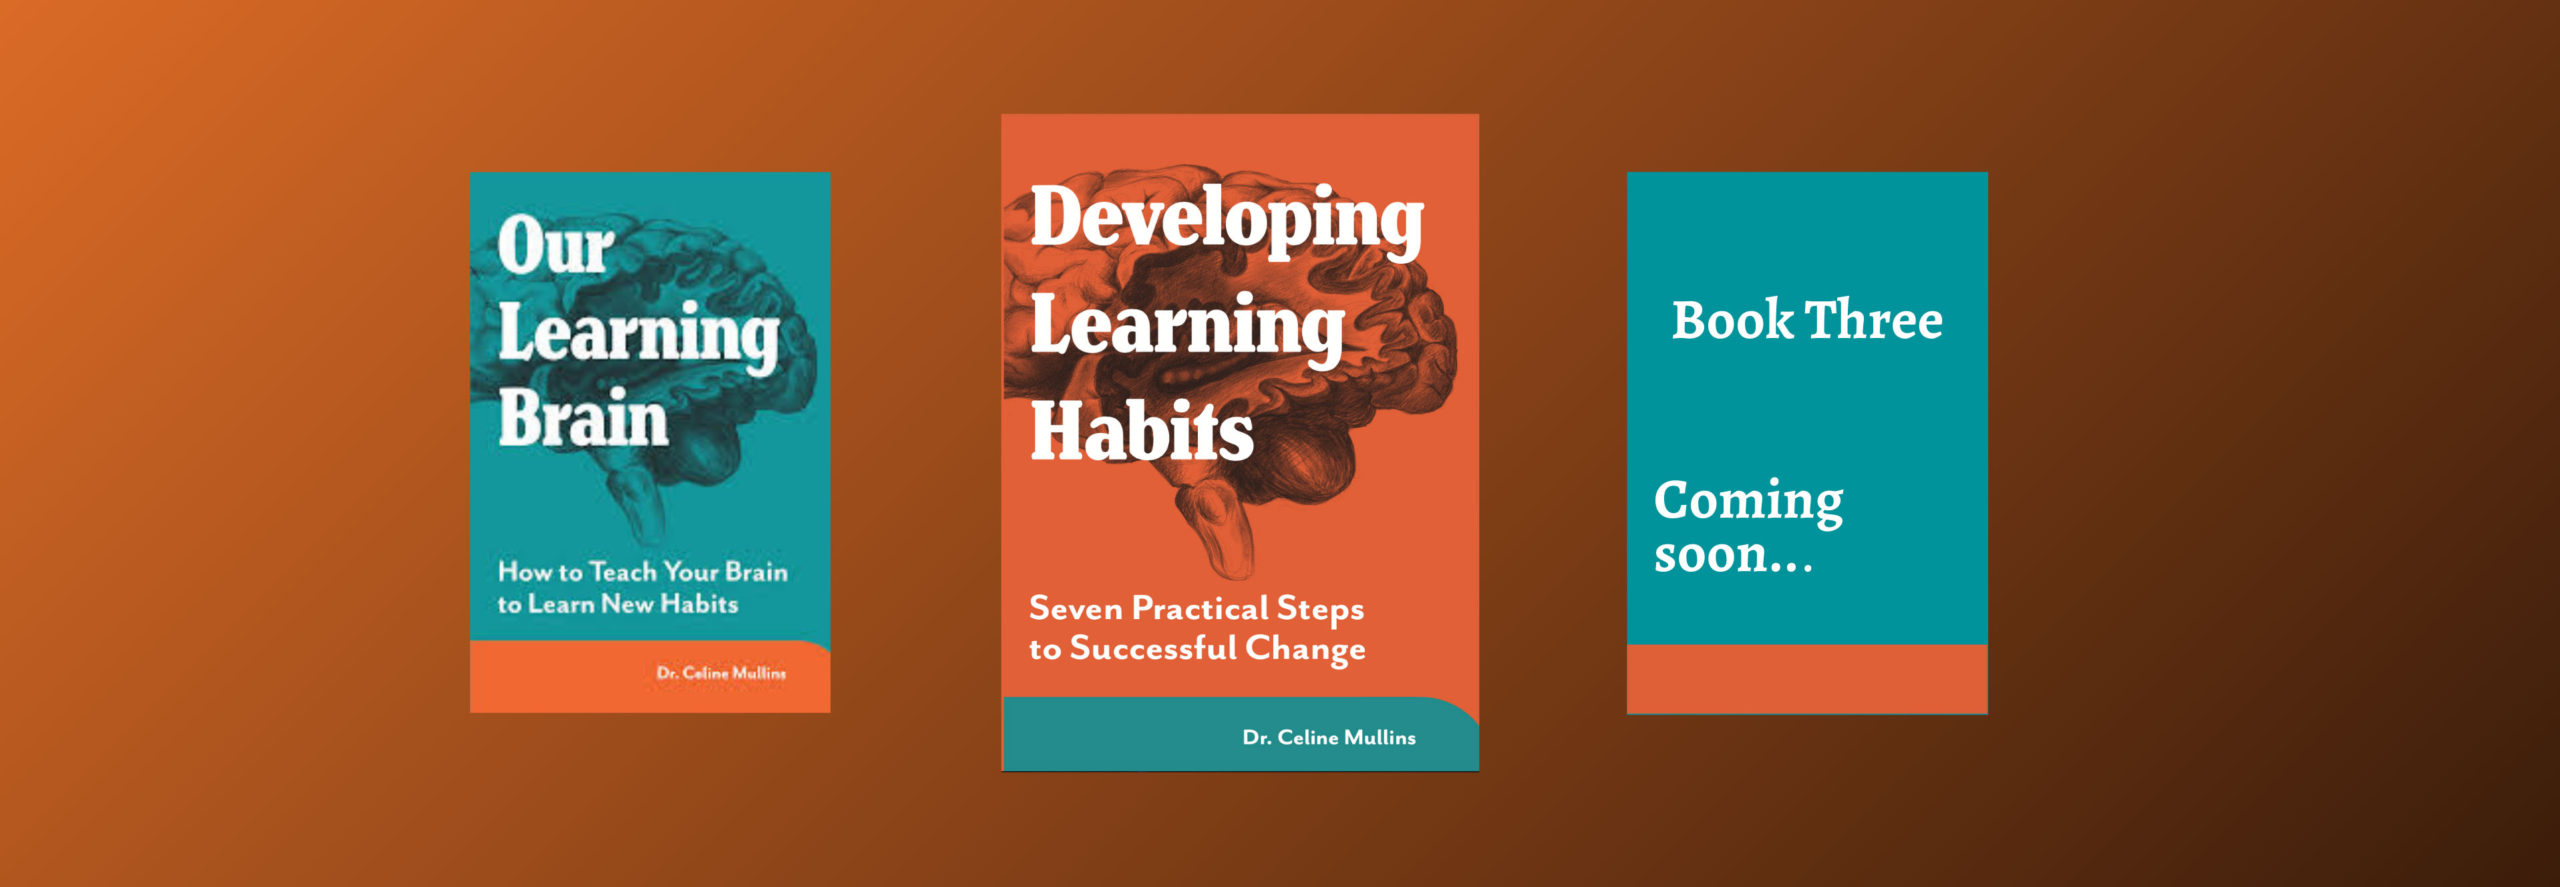 Developing Learning Habits by Adaptas Training